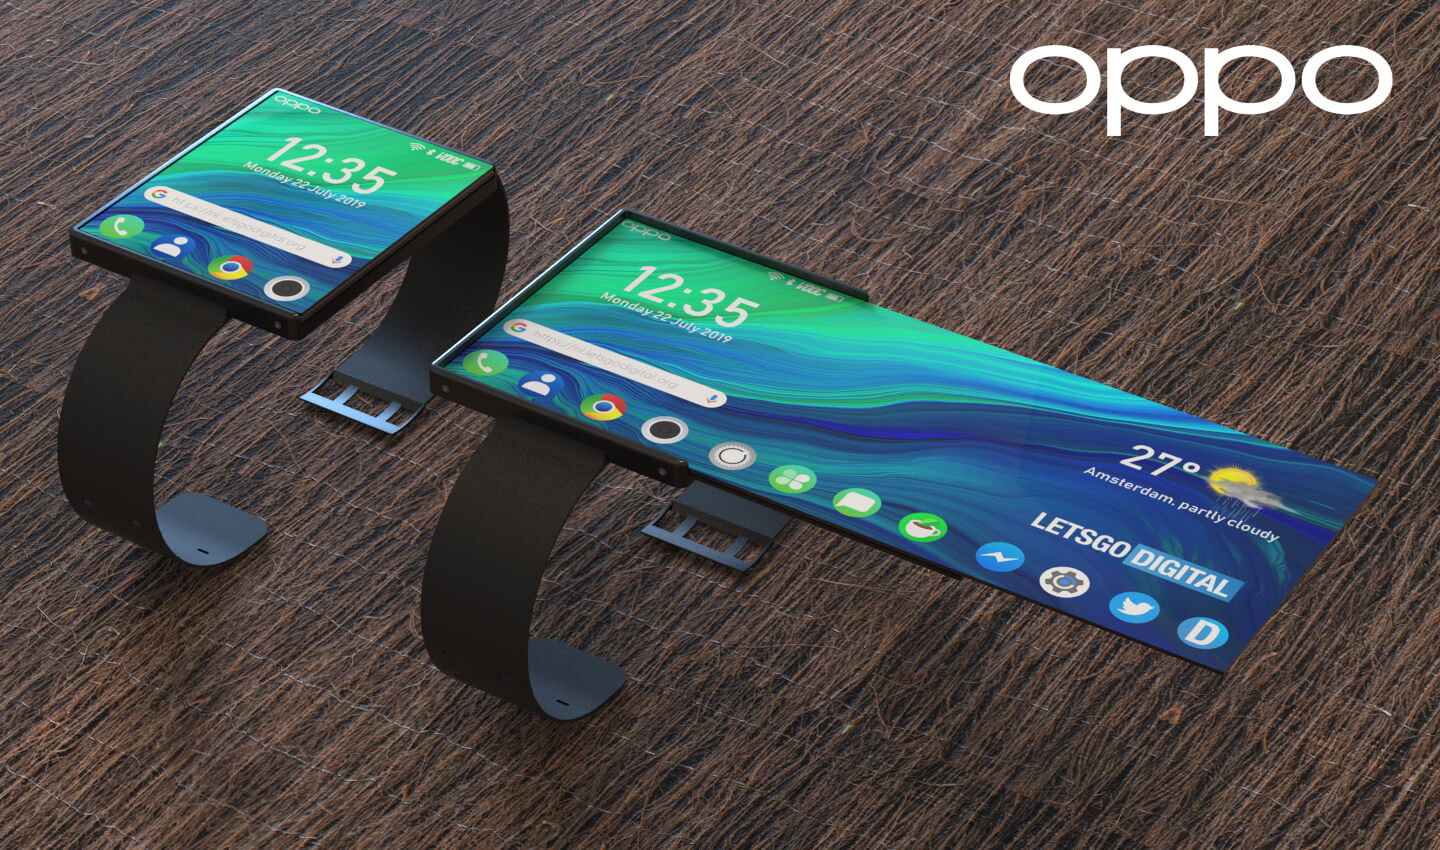 Oppo smartwatch will be a true Apple Watch competitor ...